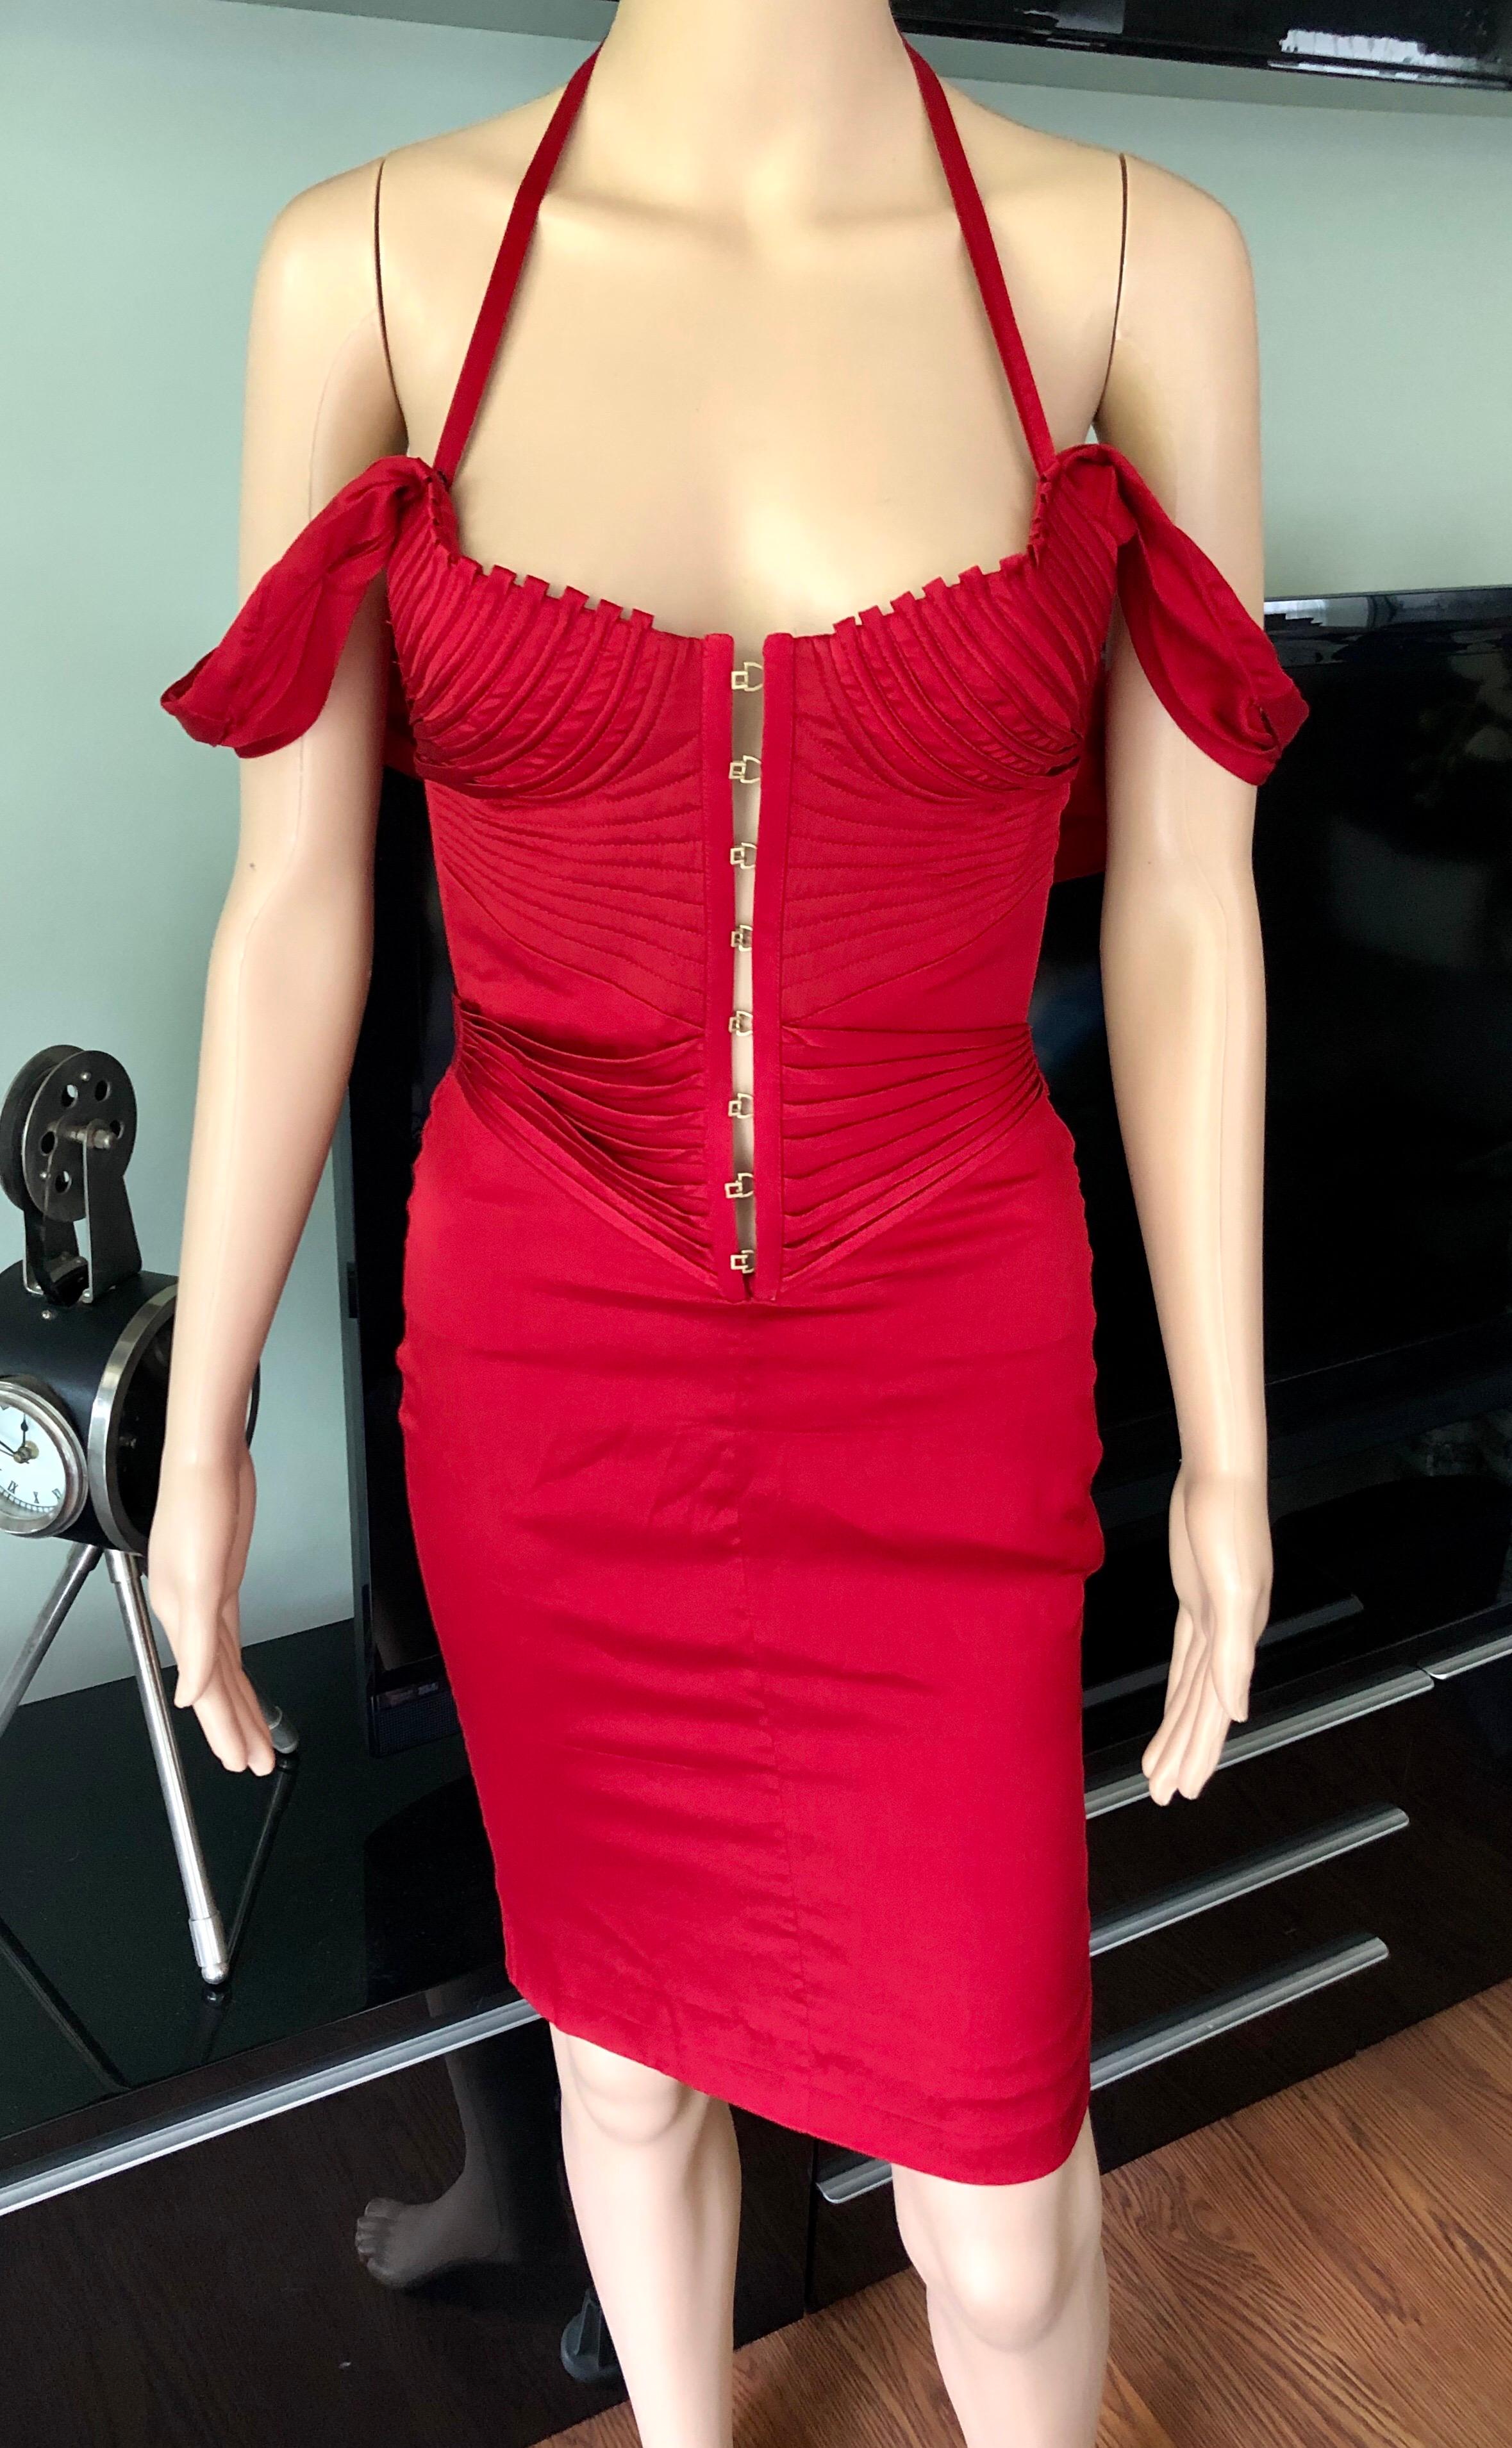 Tom Ford for Gucci F/W 2003 Runway Bustier Corset Silk Red Dress IT 42

Tom Ford for Gucci silk red dress with structured bust featuring concealed corset bodice, hook-and-eye closures at center front and concealed zip closure at center back.